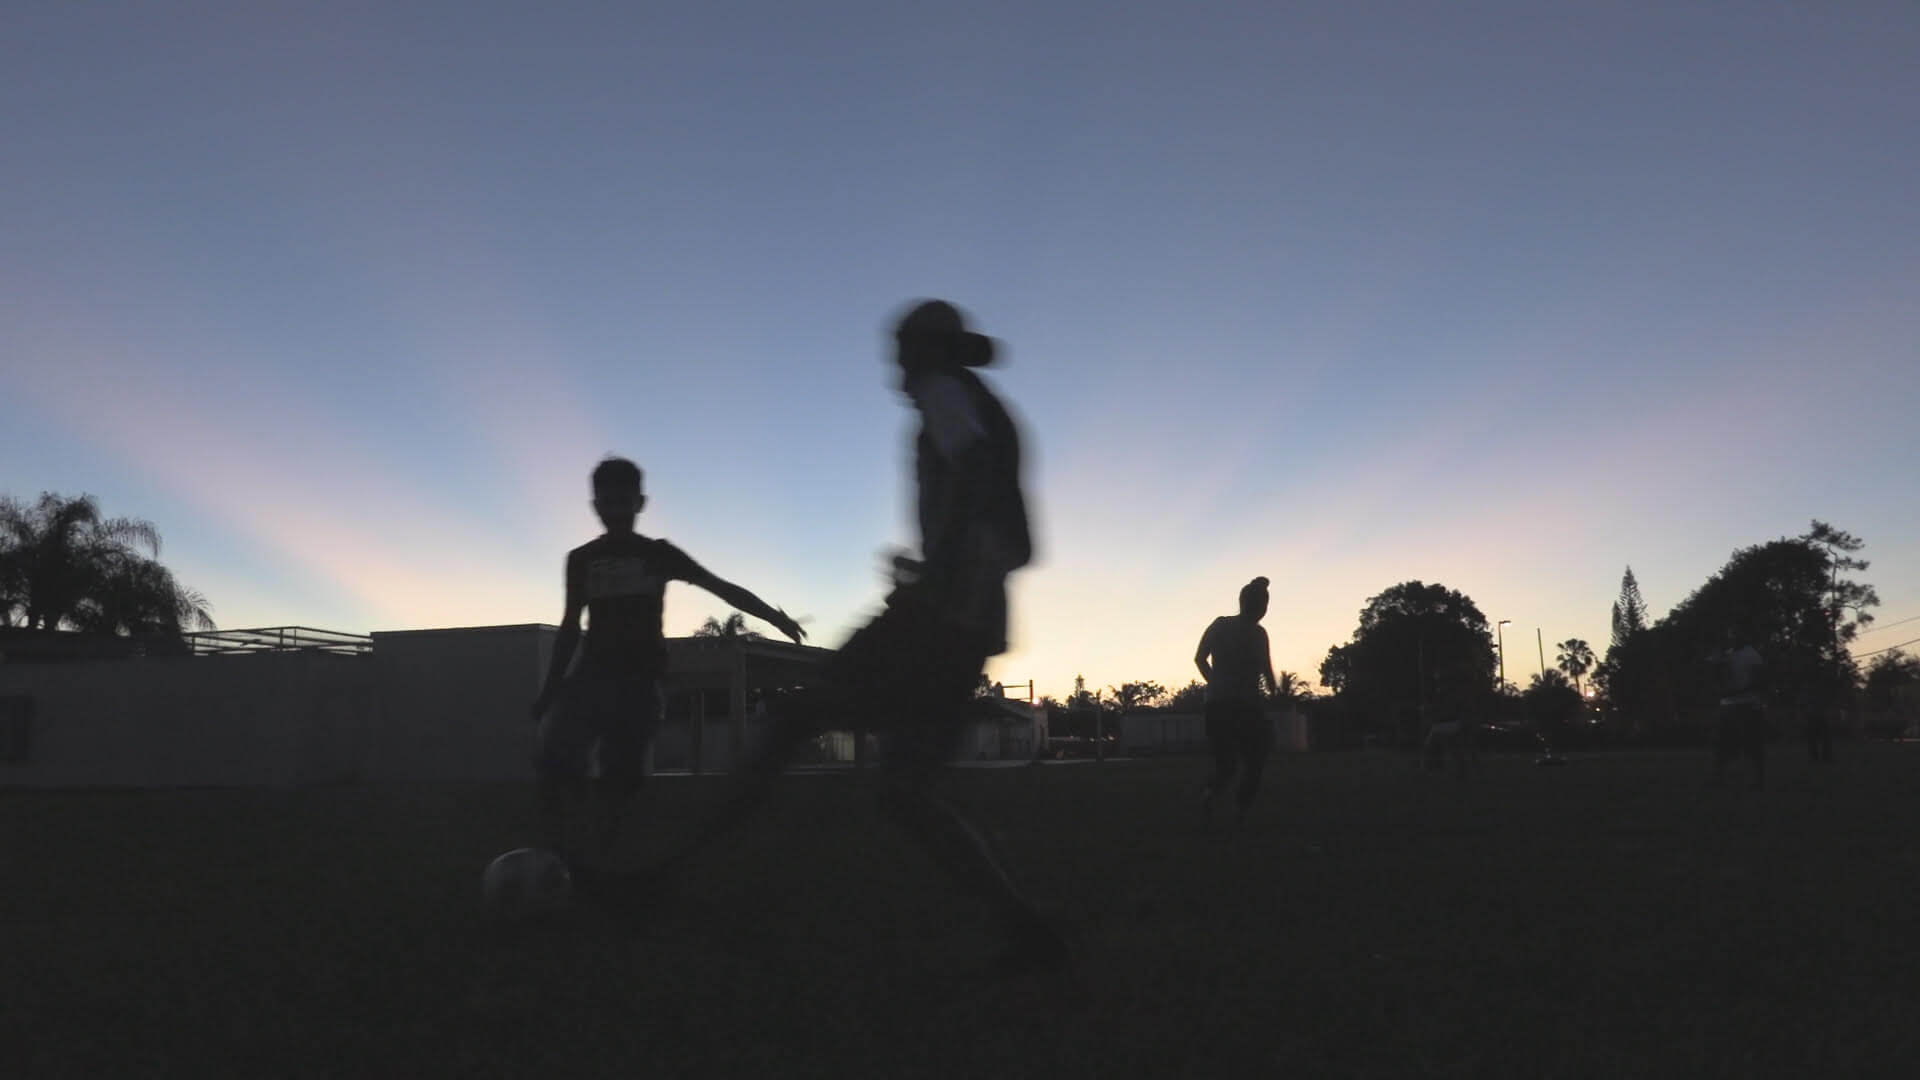 Sunset silhouette of three young people in motion playing soccer outdoors on grass.